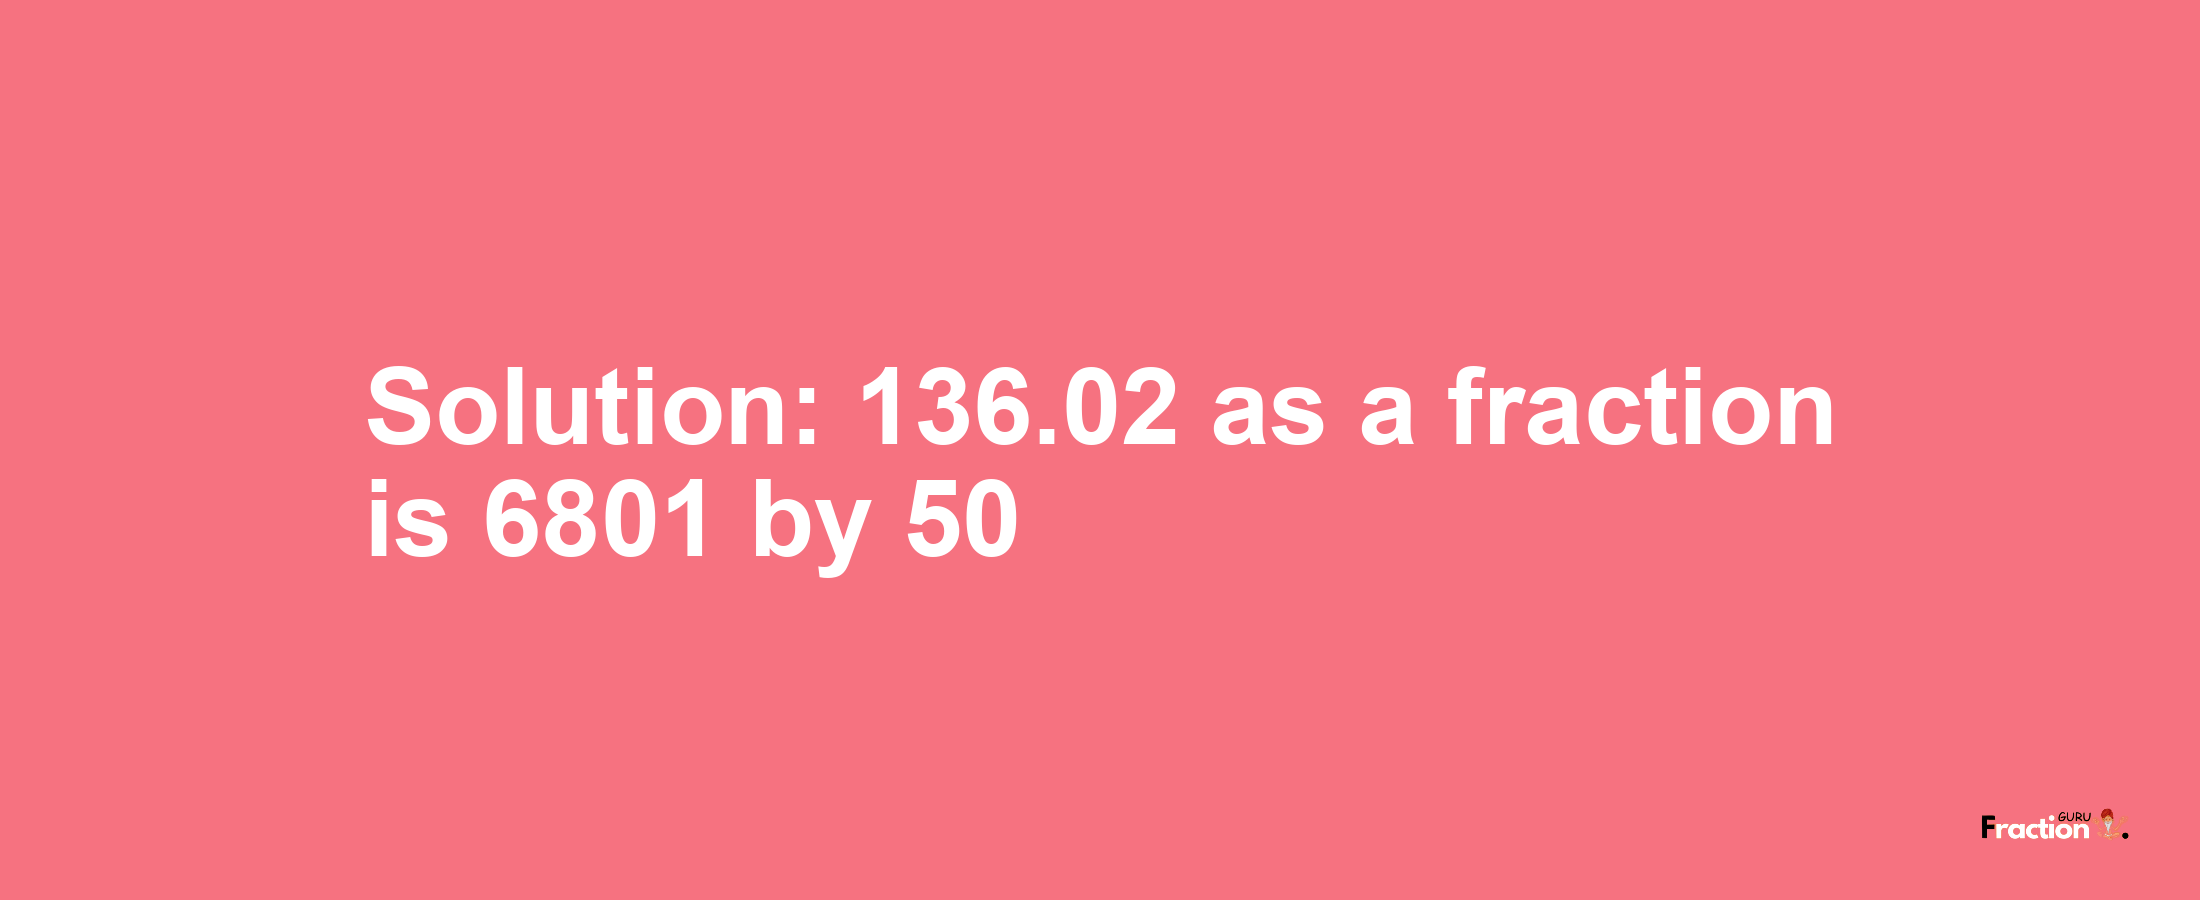 Solution:136.02 as a fraction is 6801/50